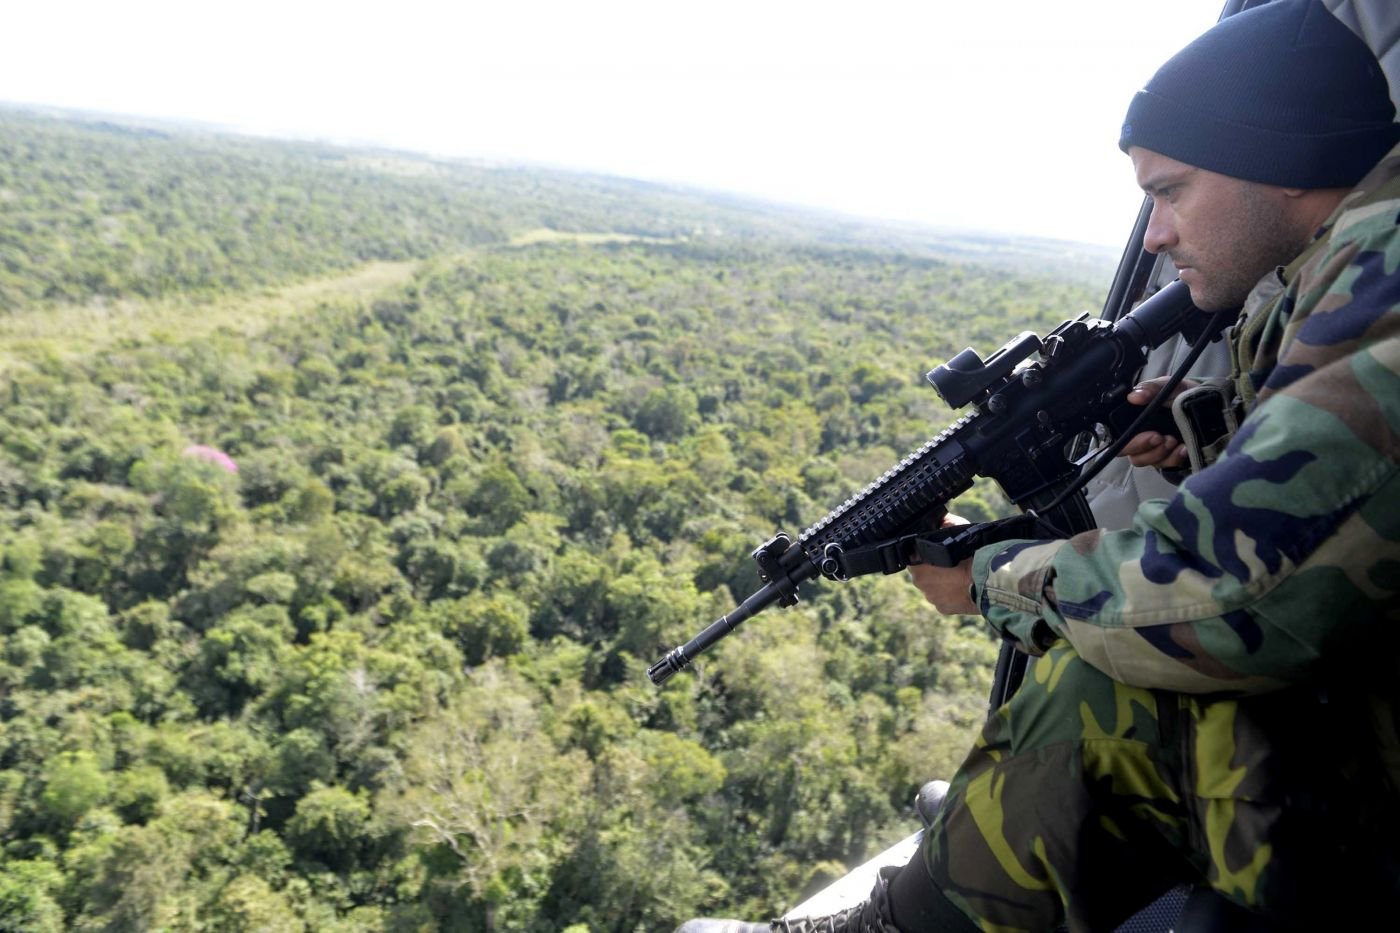 Paraguay’s Anti-Terrorist Group and the US